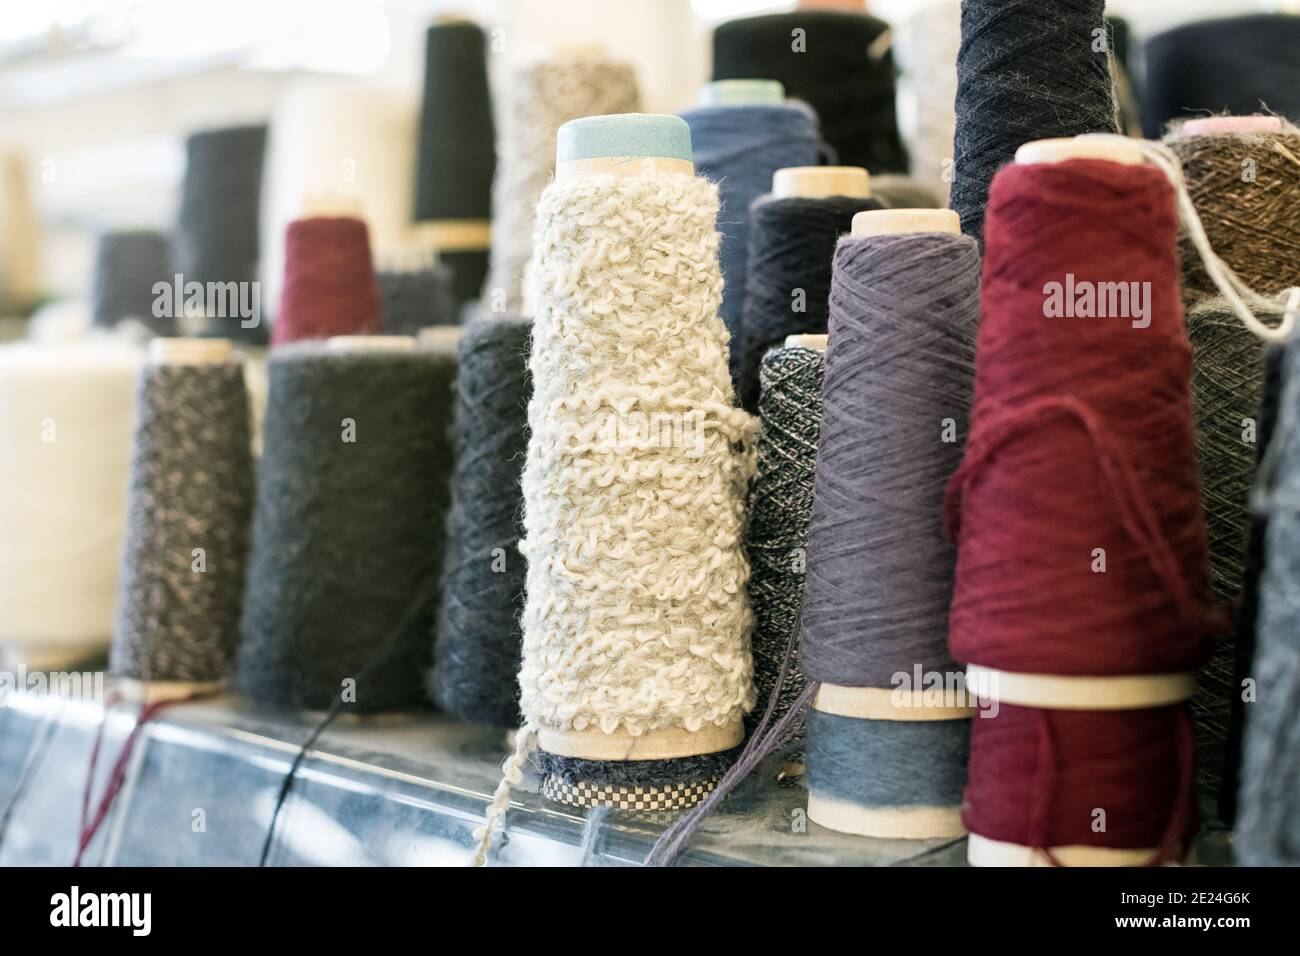 Spools and reels of spun cashmere wool or yarn in assorted colors and textures on a shelf in close up Stock Photo